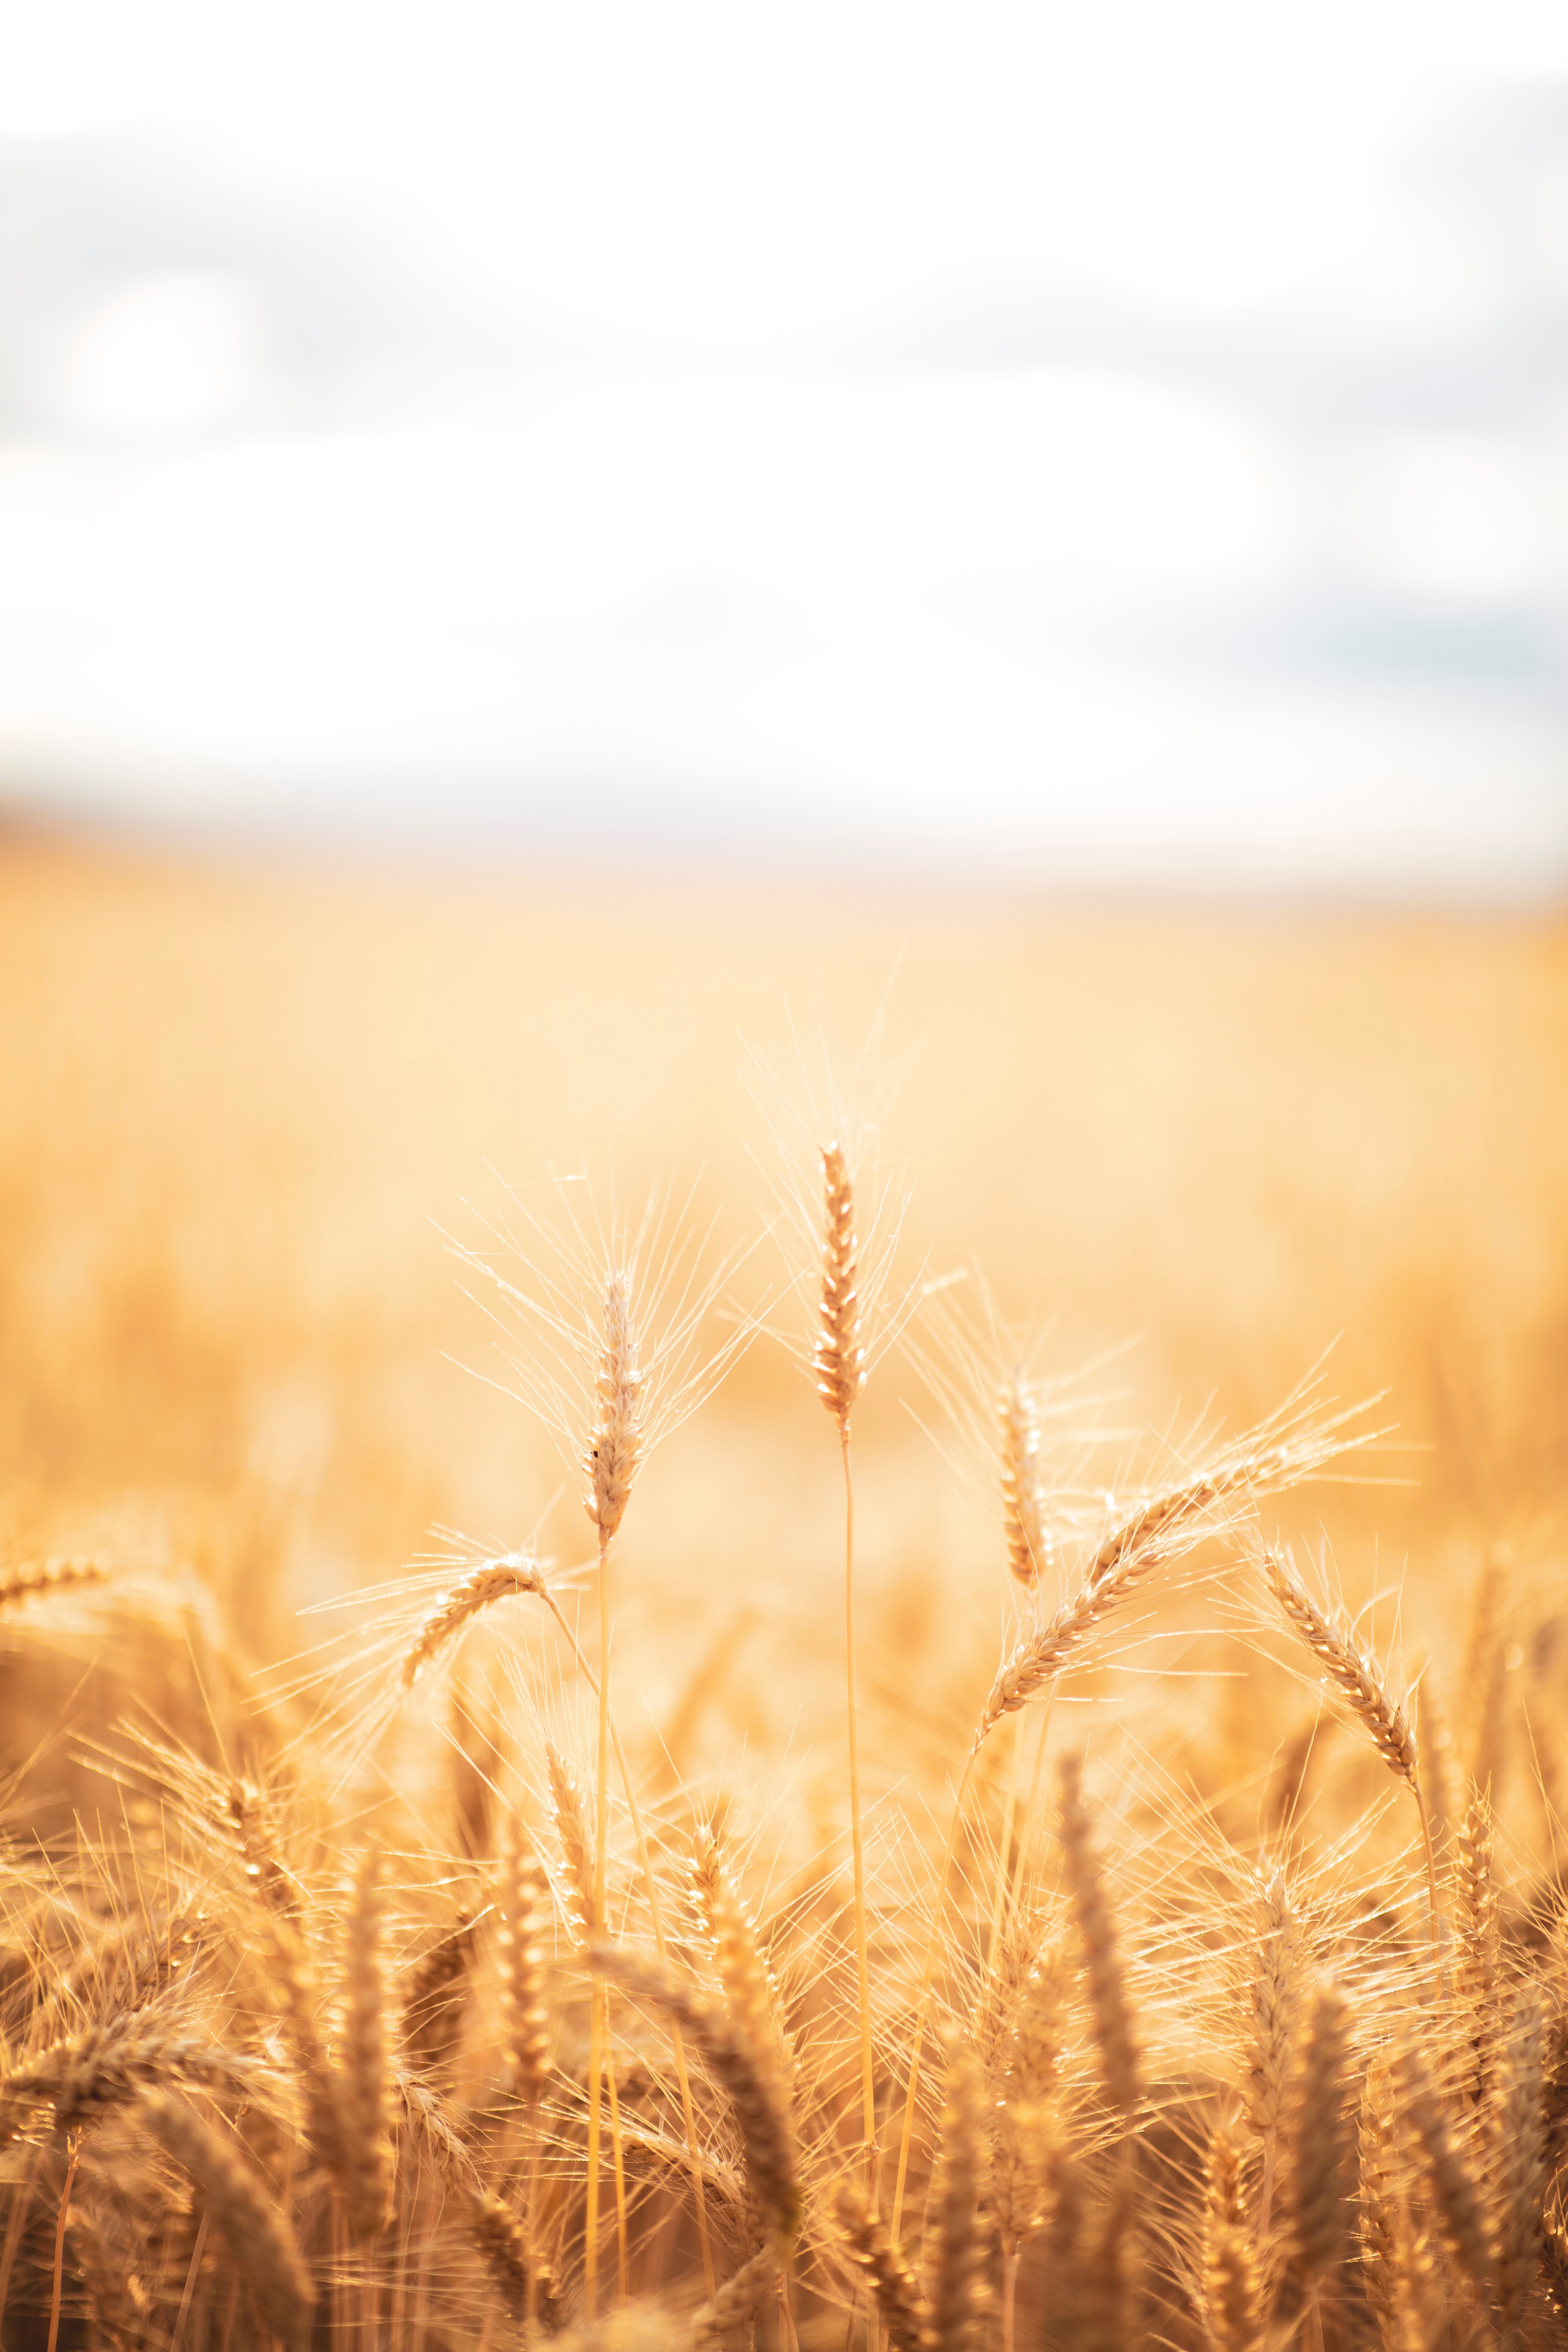 Popular Wheat Image for Phone